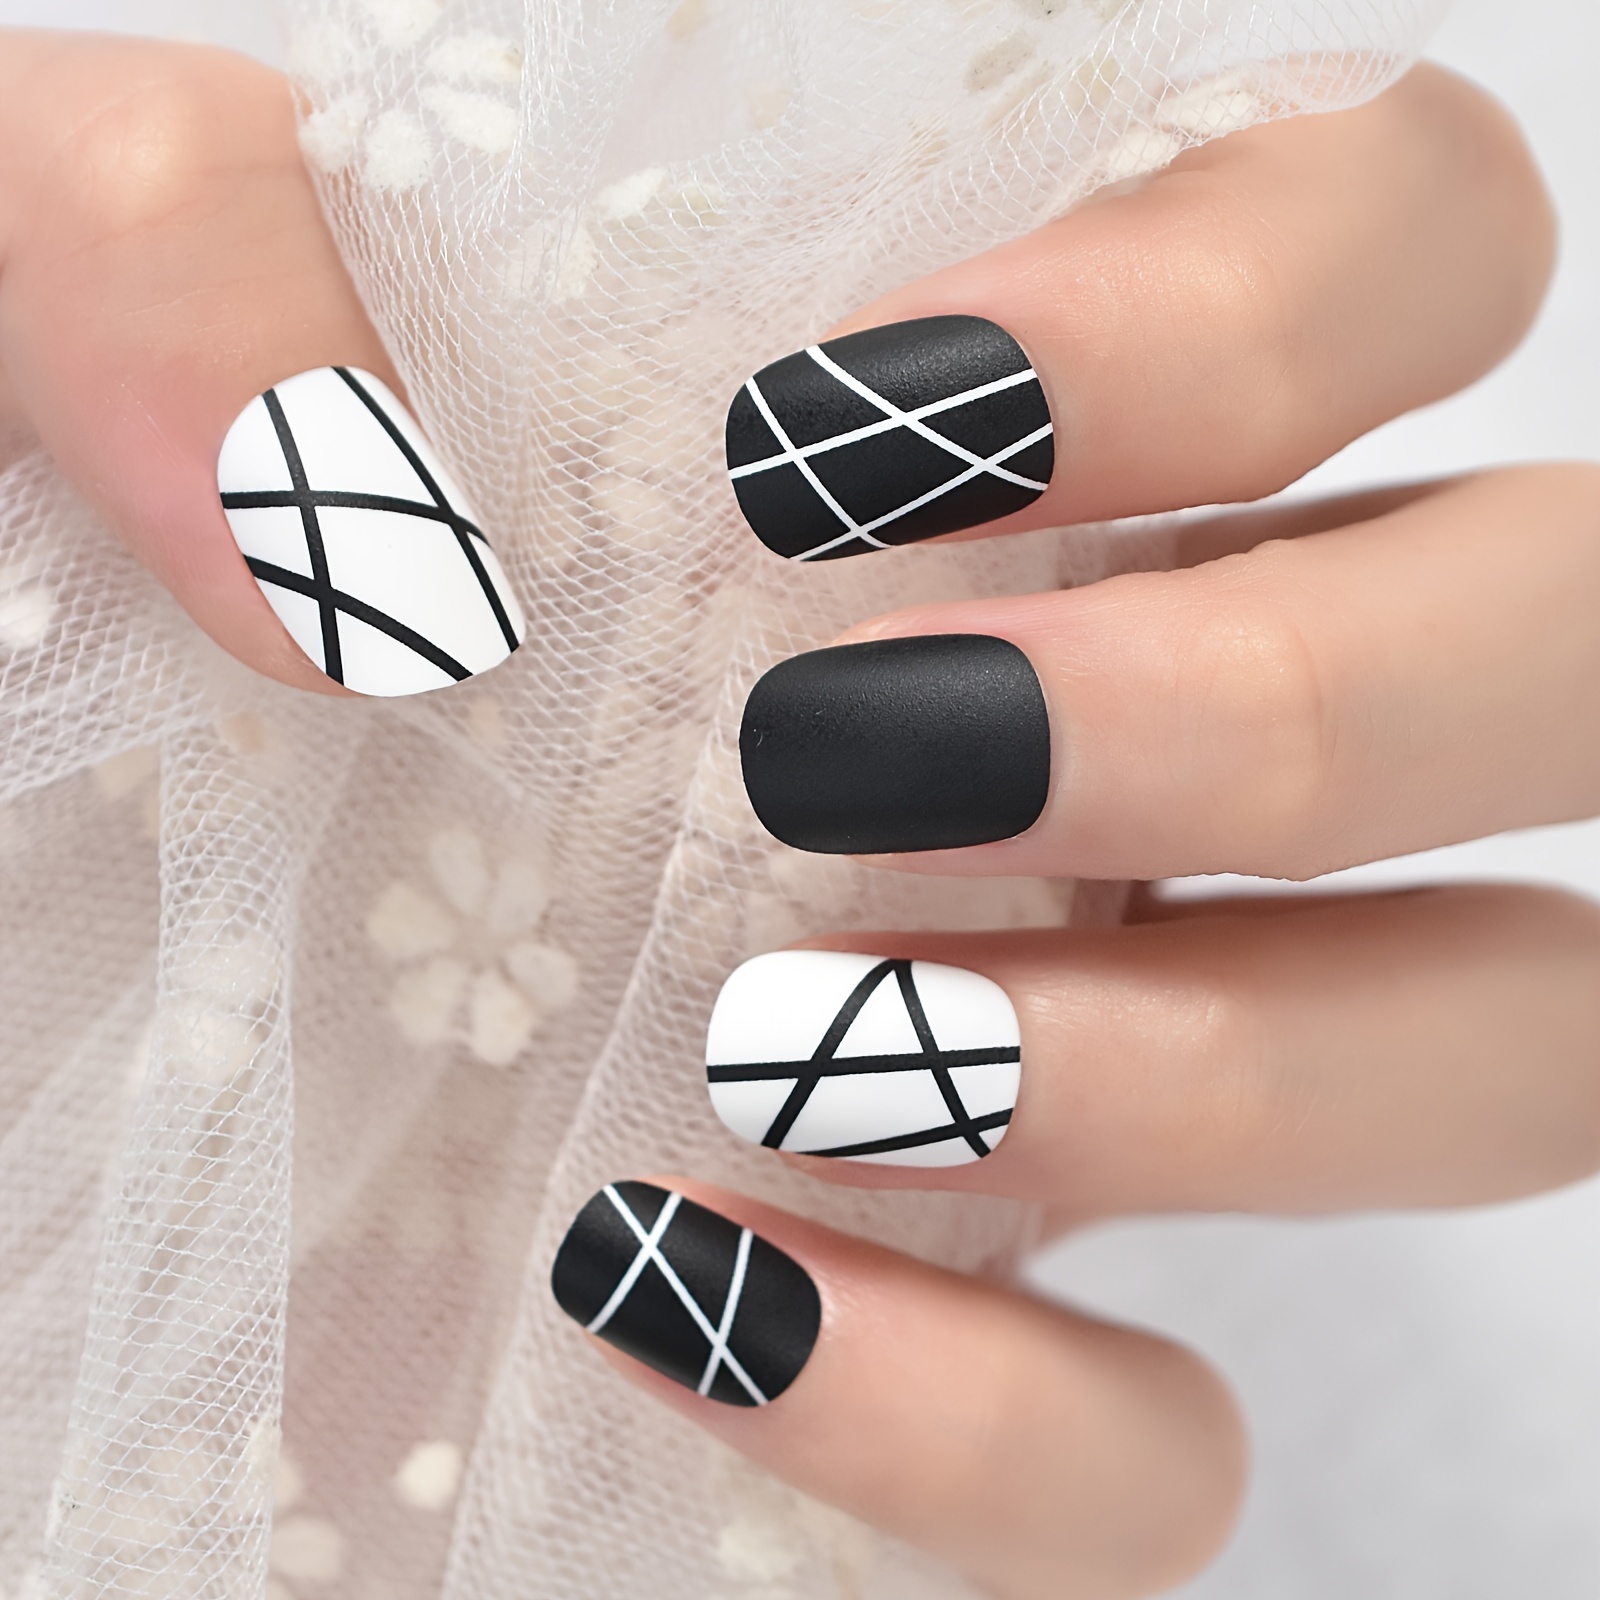 Full set of stiletto nails with black and white nail art | Flickr